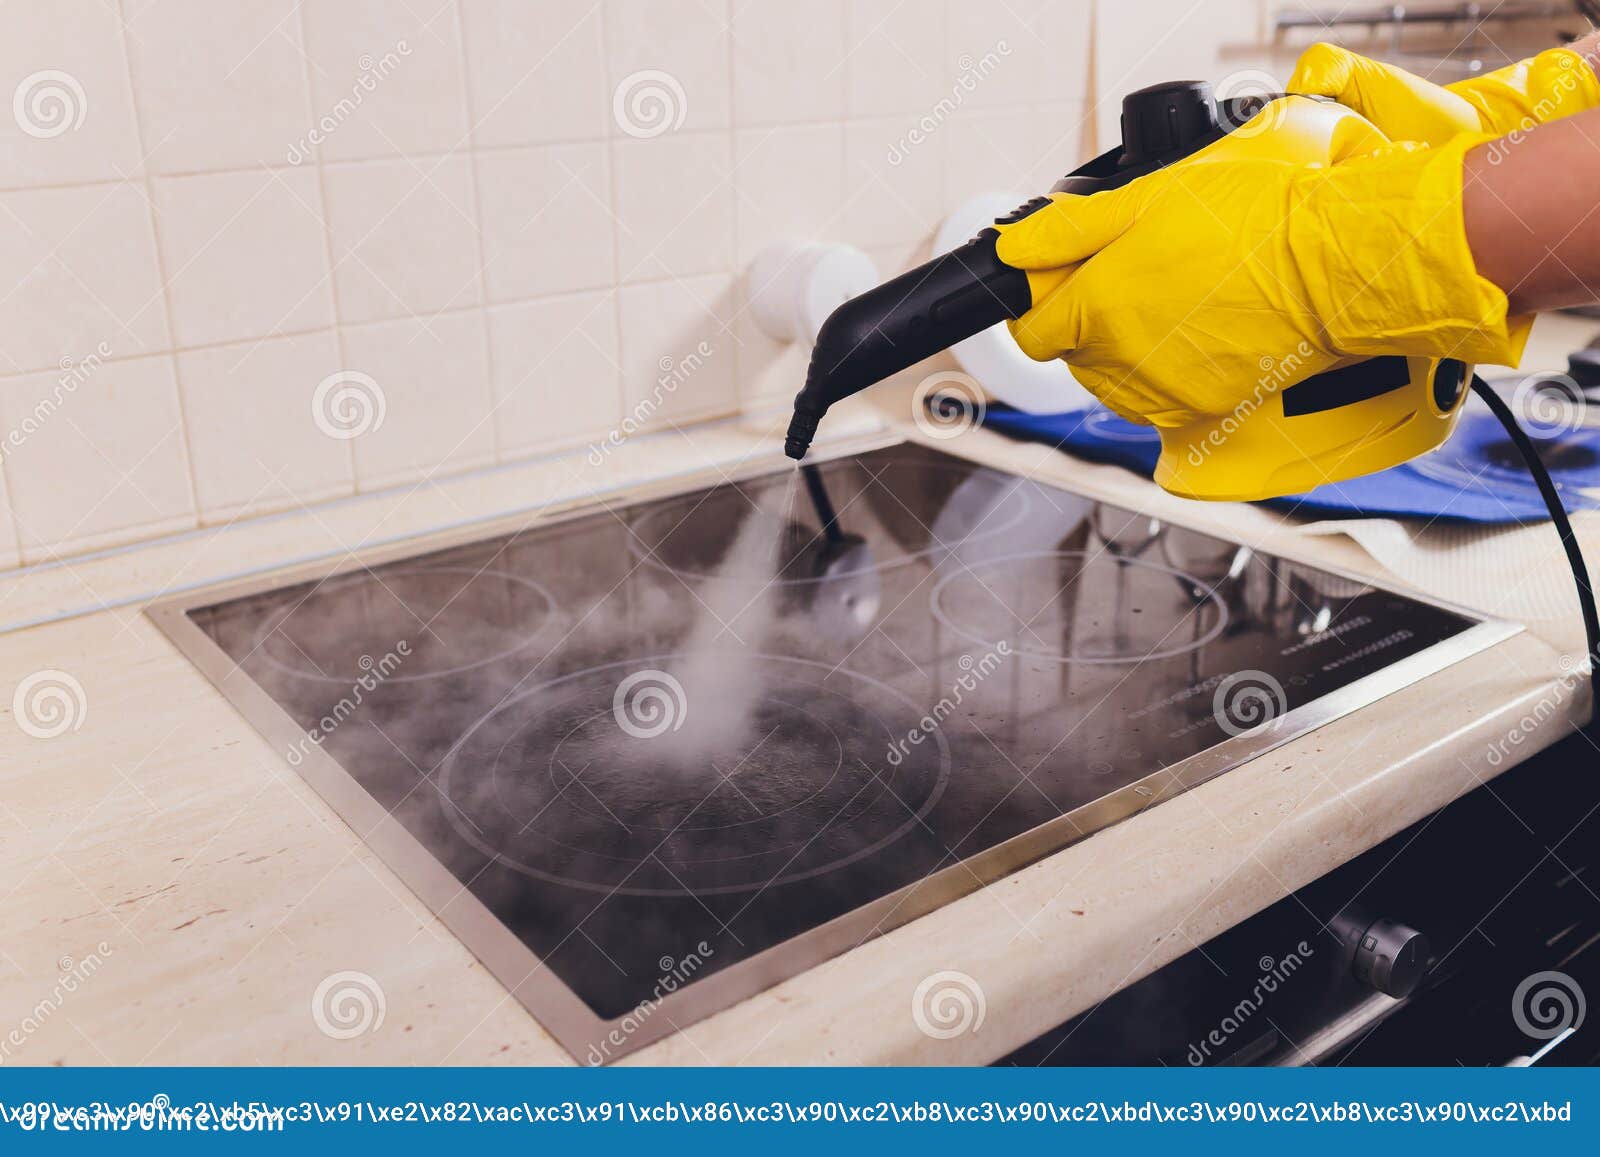 Cleaning Kitchen Hob Steam Cleaner 170127480 